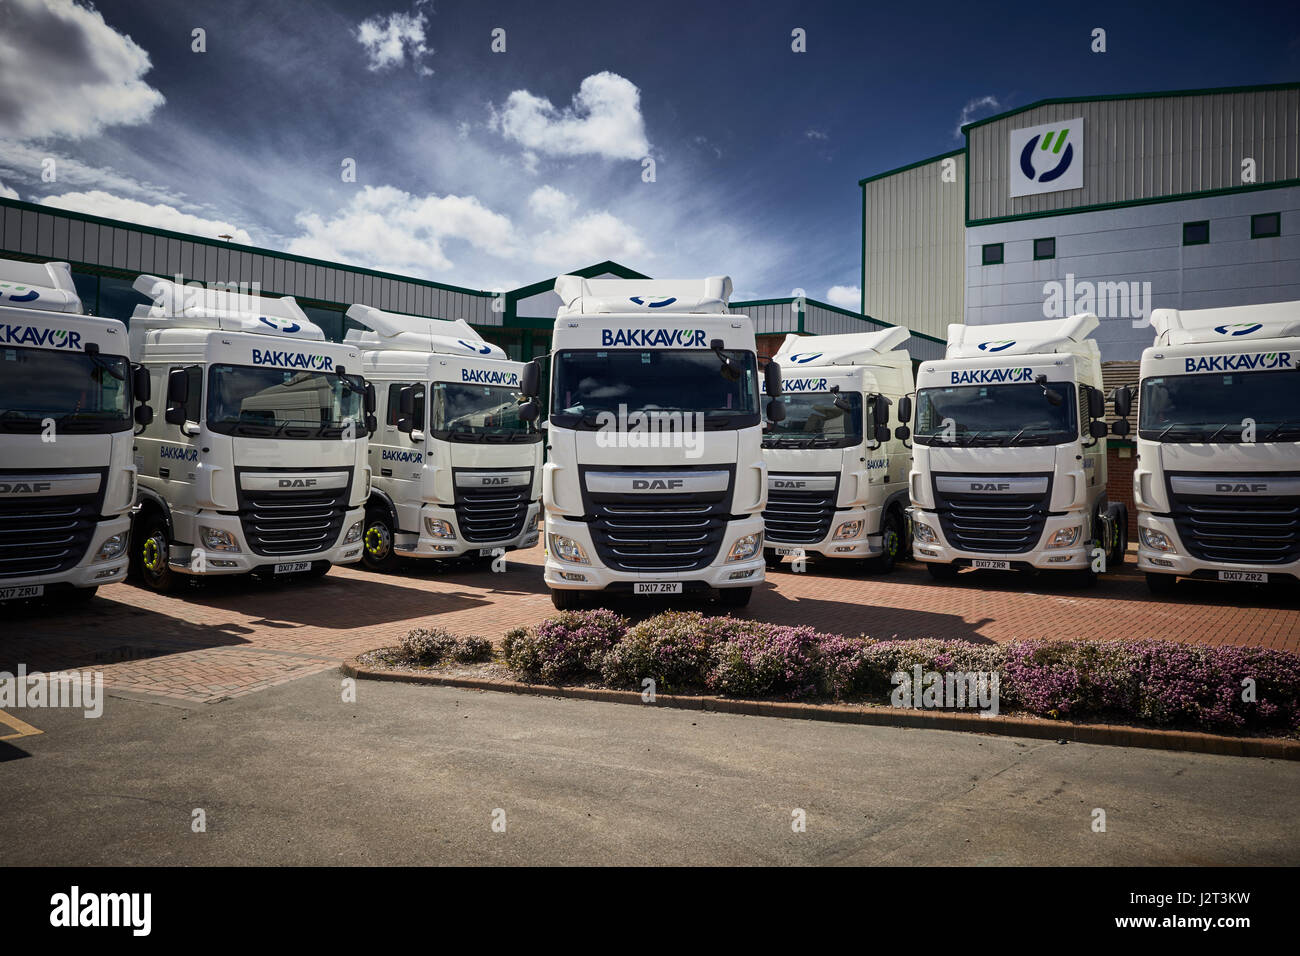 DAF HGV truck tractor units Stock Photo